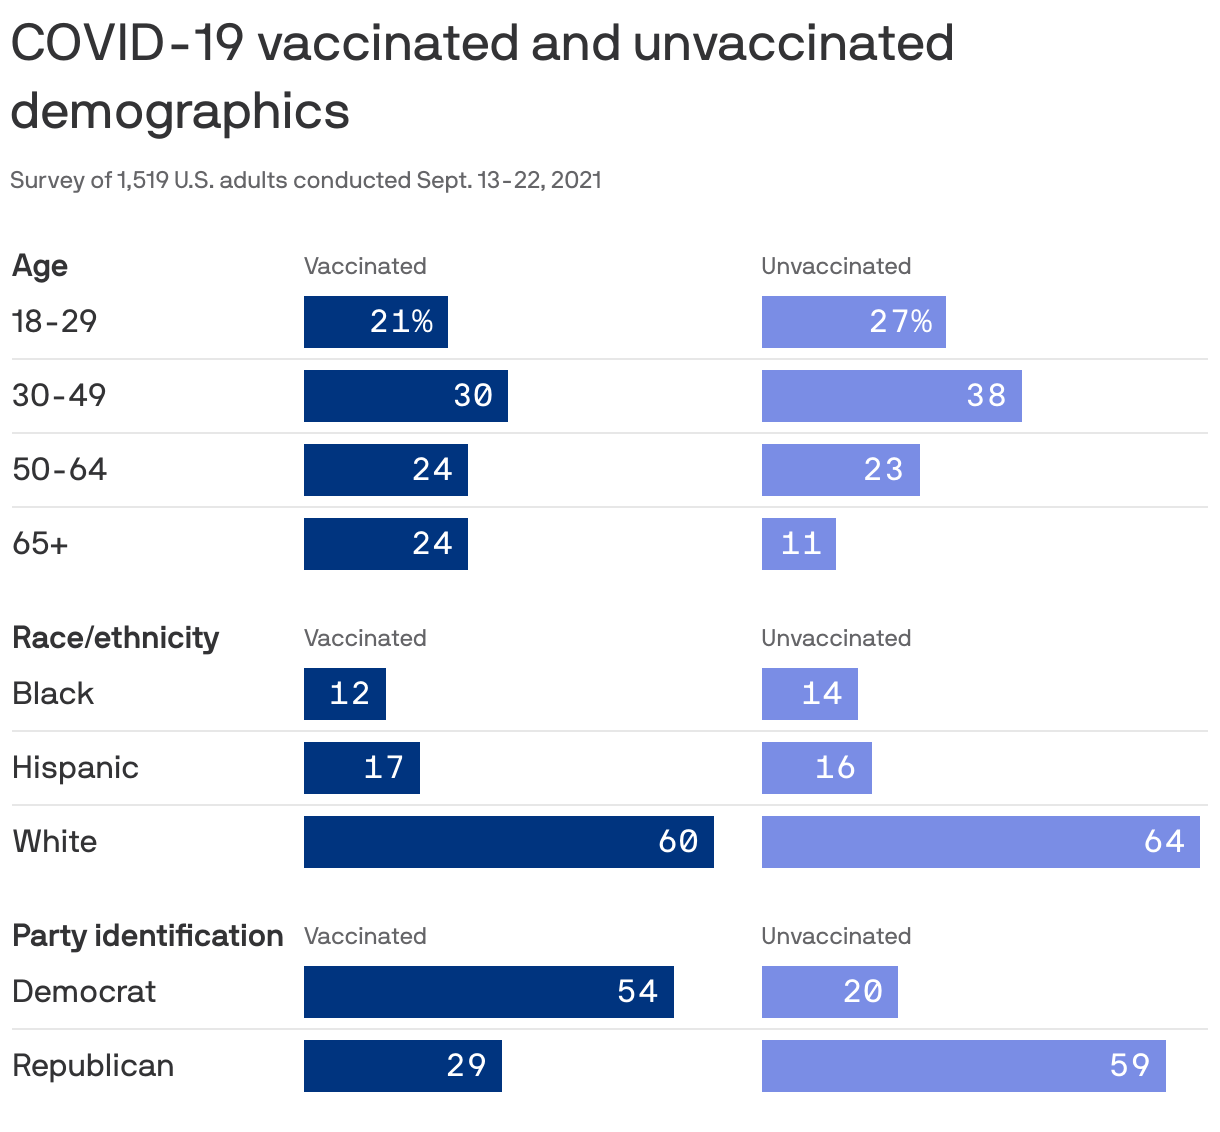 COVID-19 vaccinated and unvaccinated demographics